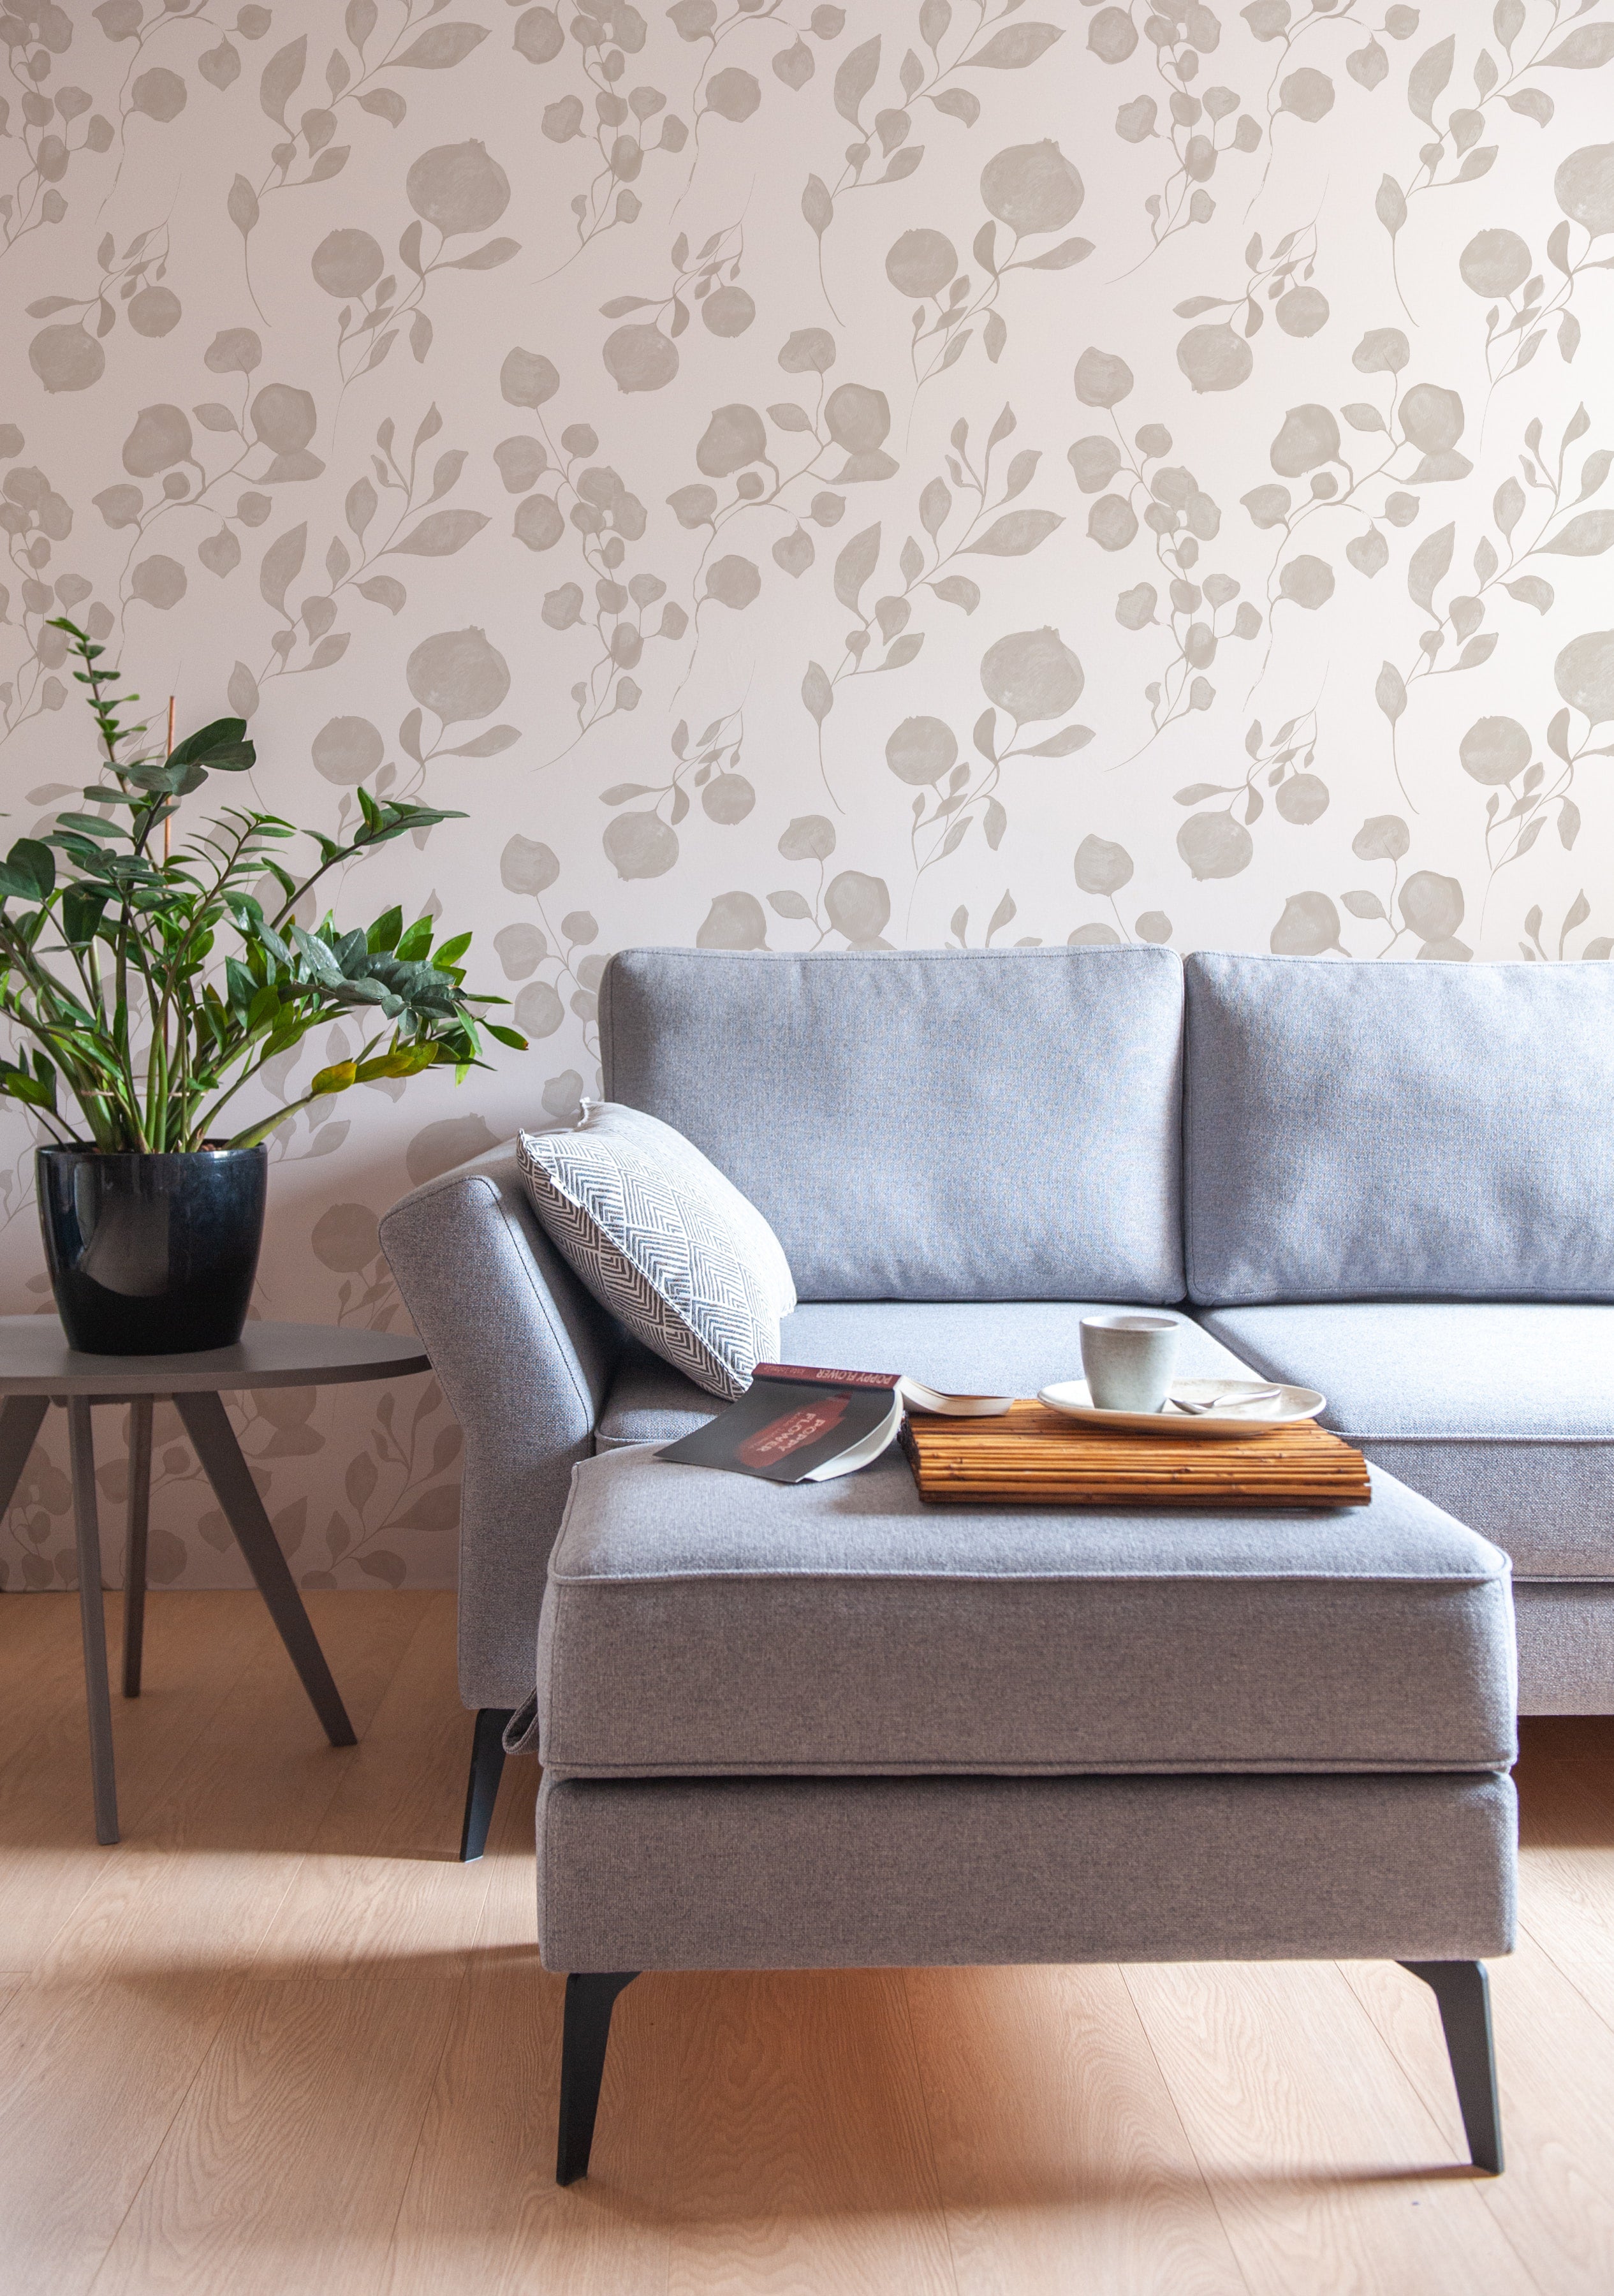 A contemporary living room featuring the "Atelier Botanique Wallpaper" with a minimalist botanical pattern in shades of grey. The elegant design provides a subtle backdrop to a modern grey sofa, accentuated by a black side table and a vibrant green houseplant, creating a serene and stylish space.